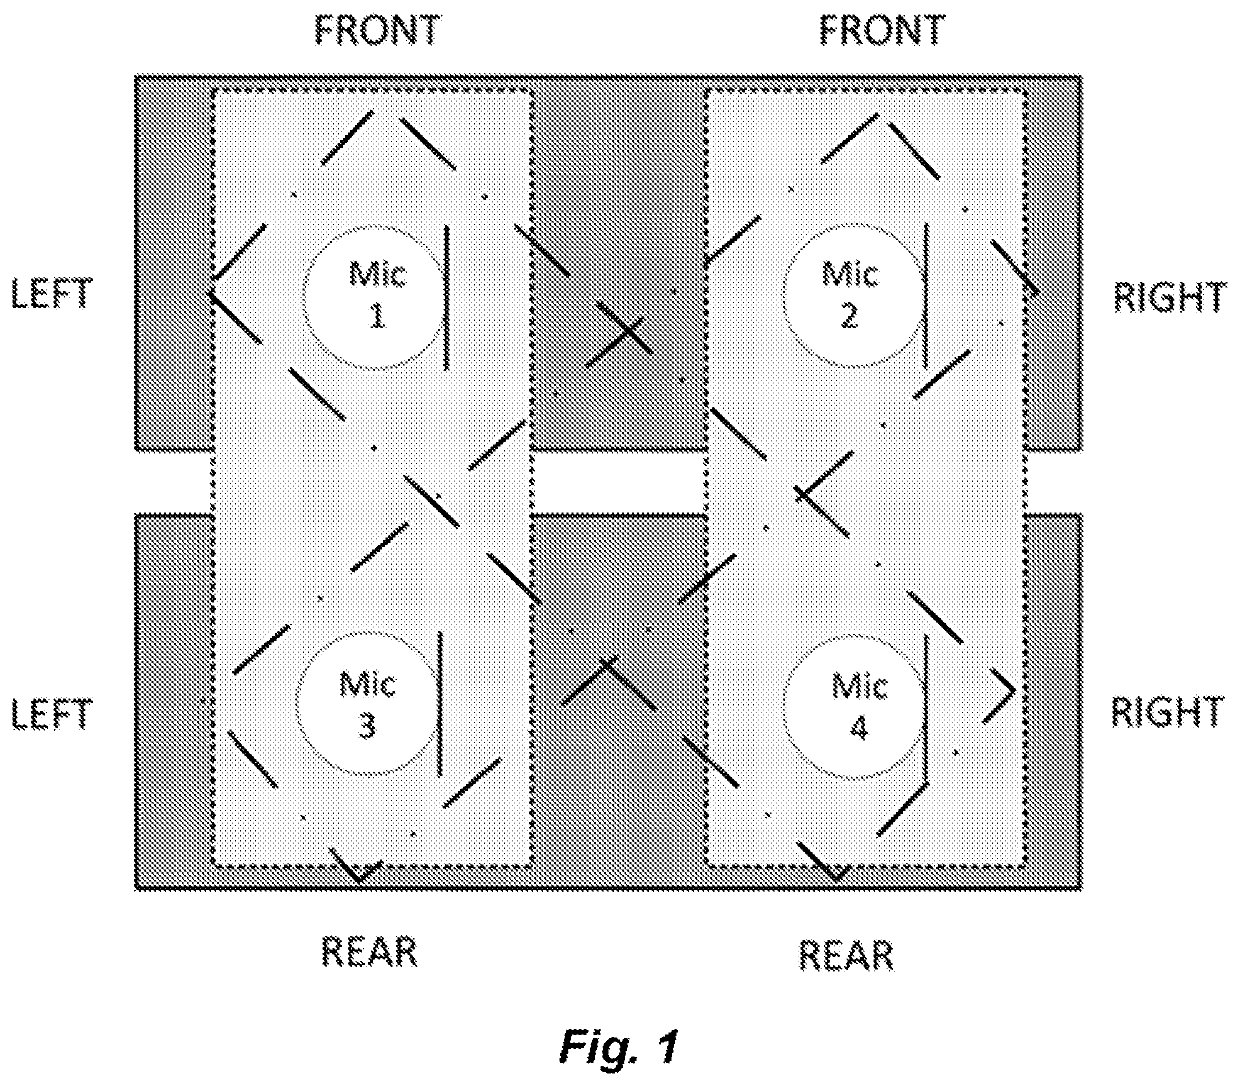 Dual-microphone methods for reverberation mitigation